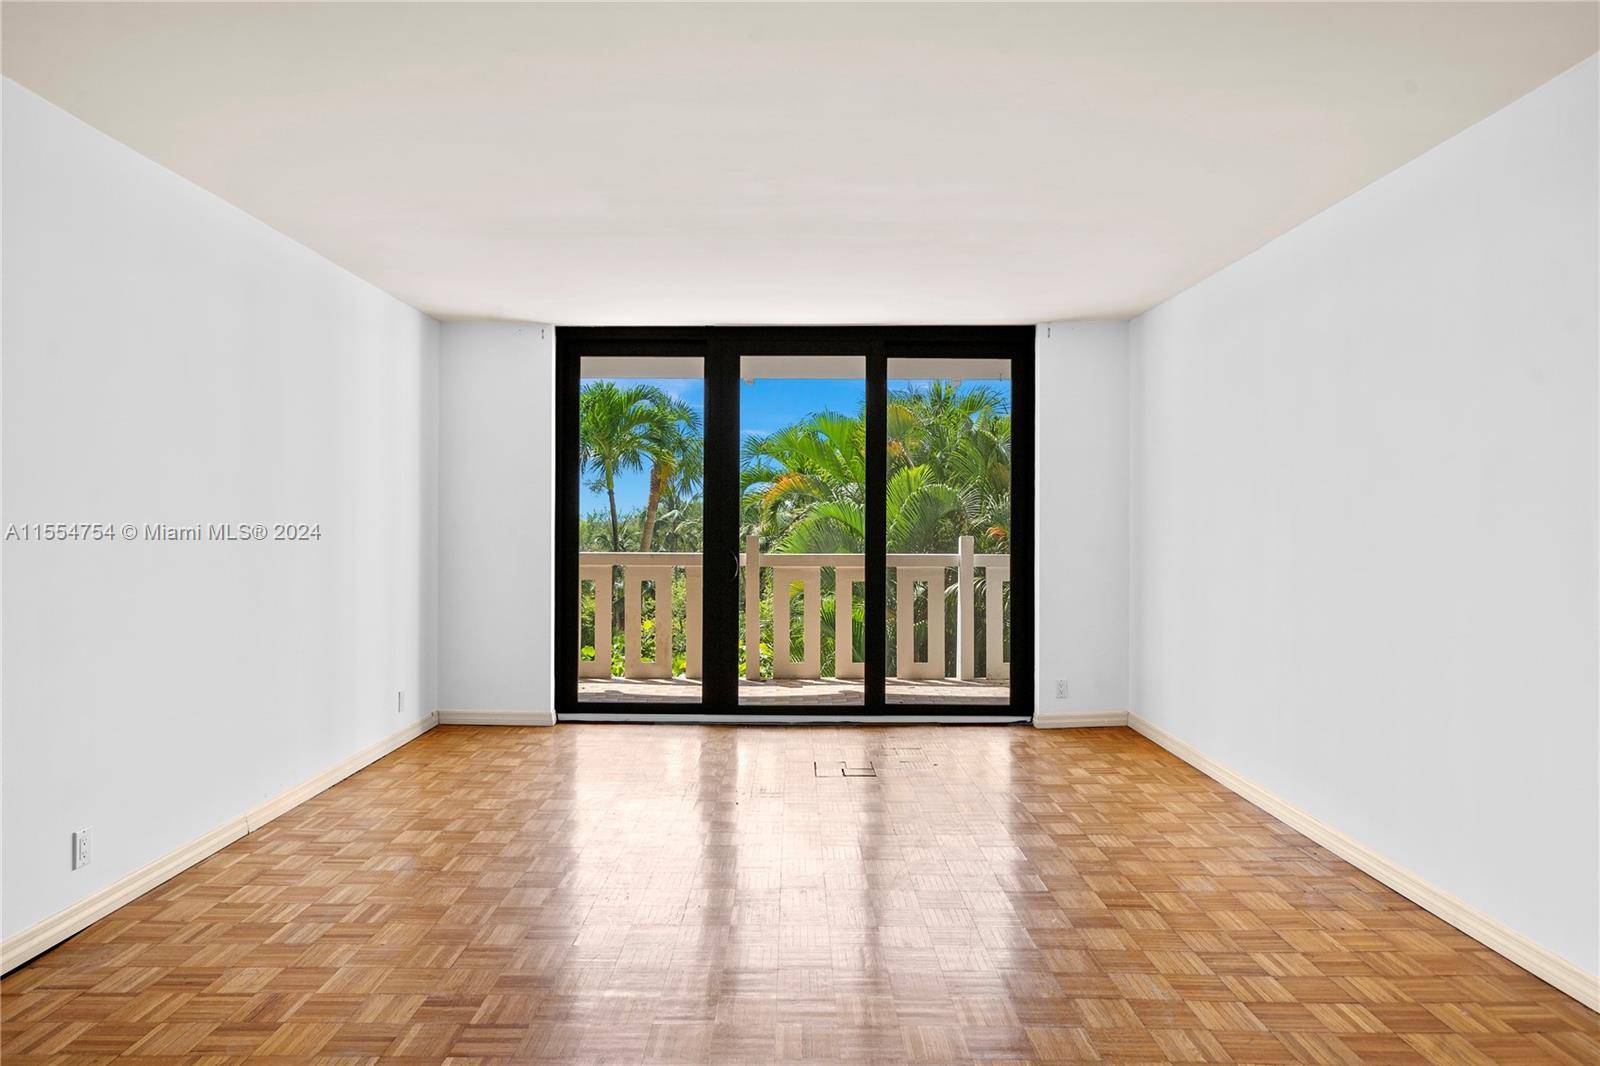 SPACIOUS 2 BED, 2 BATH UNIT AT THE TOWERS OF KEY BISCAYNE.